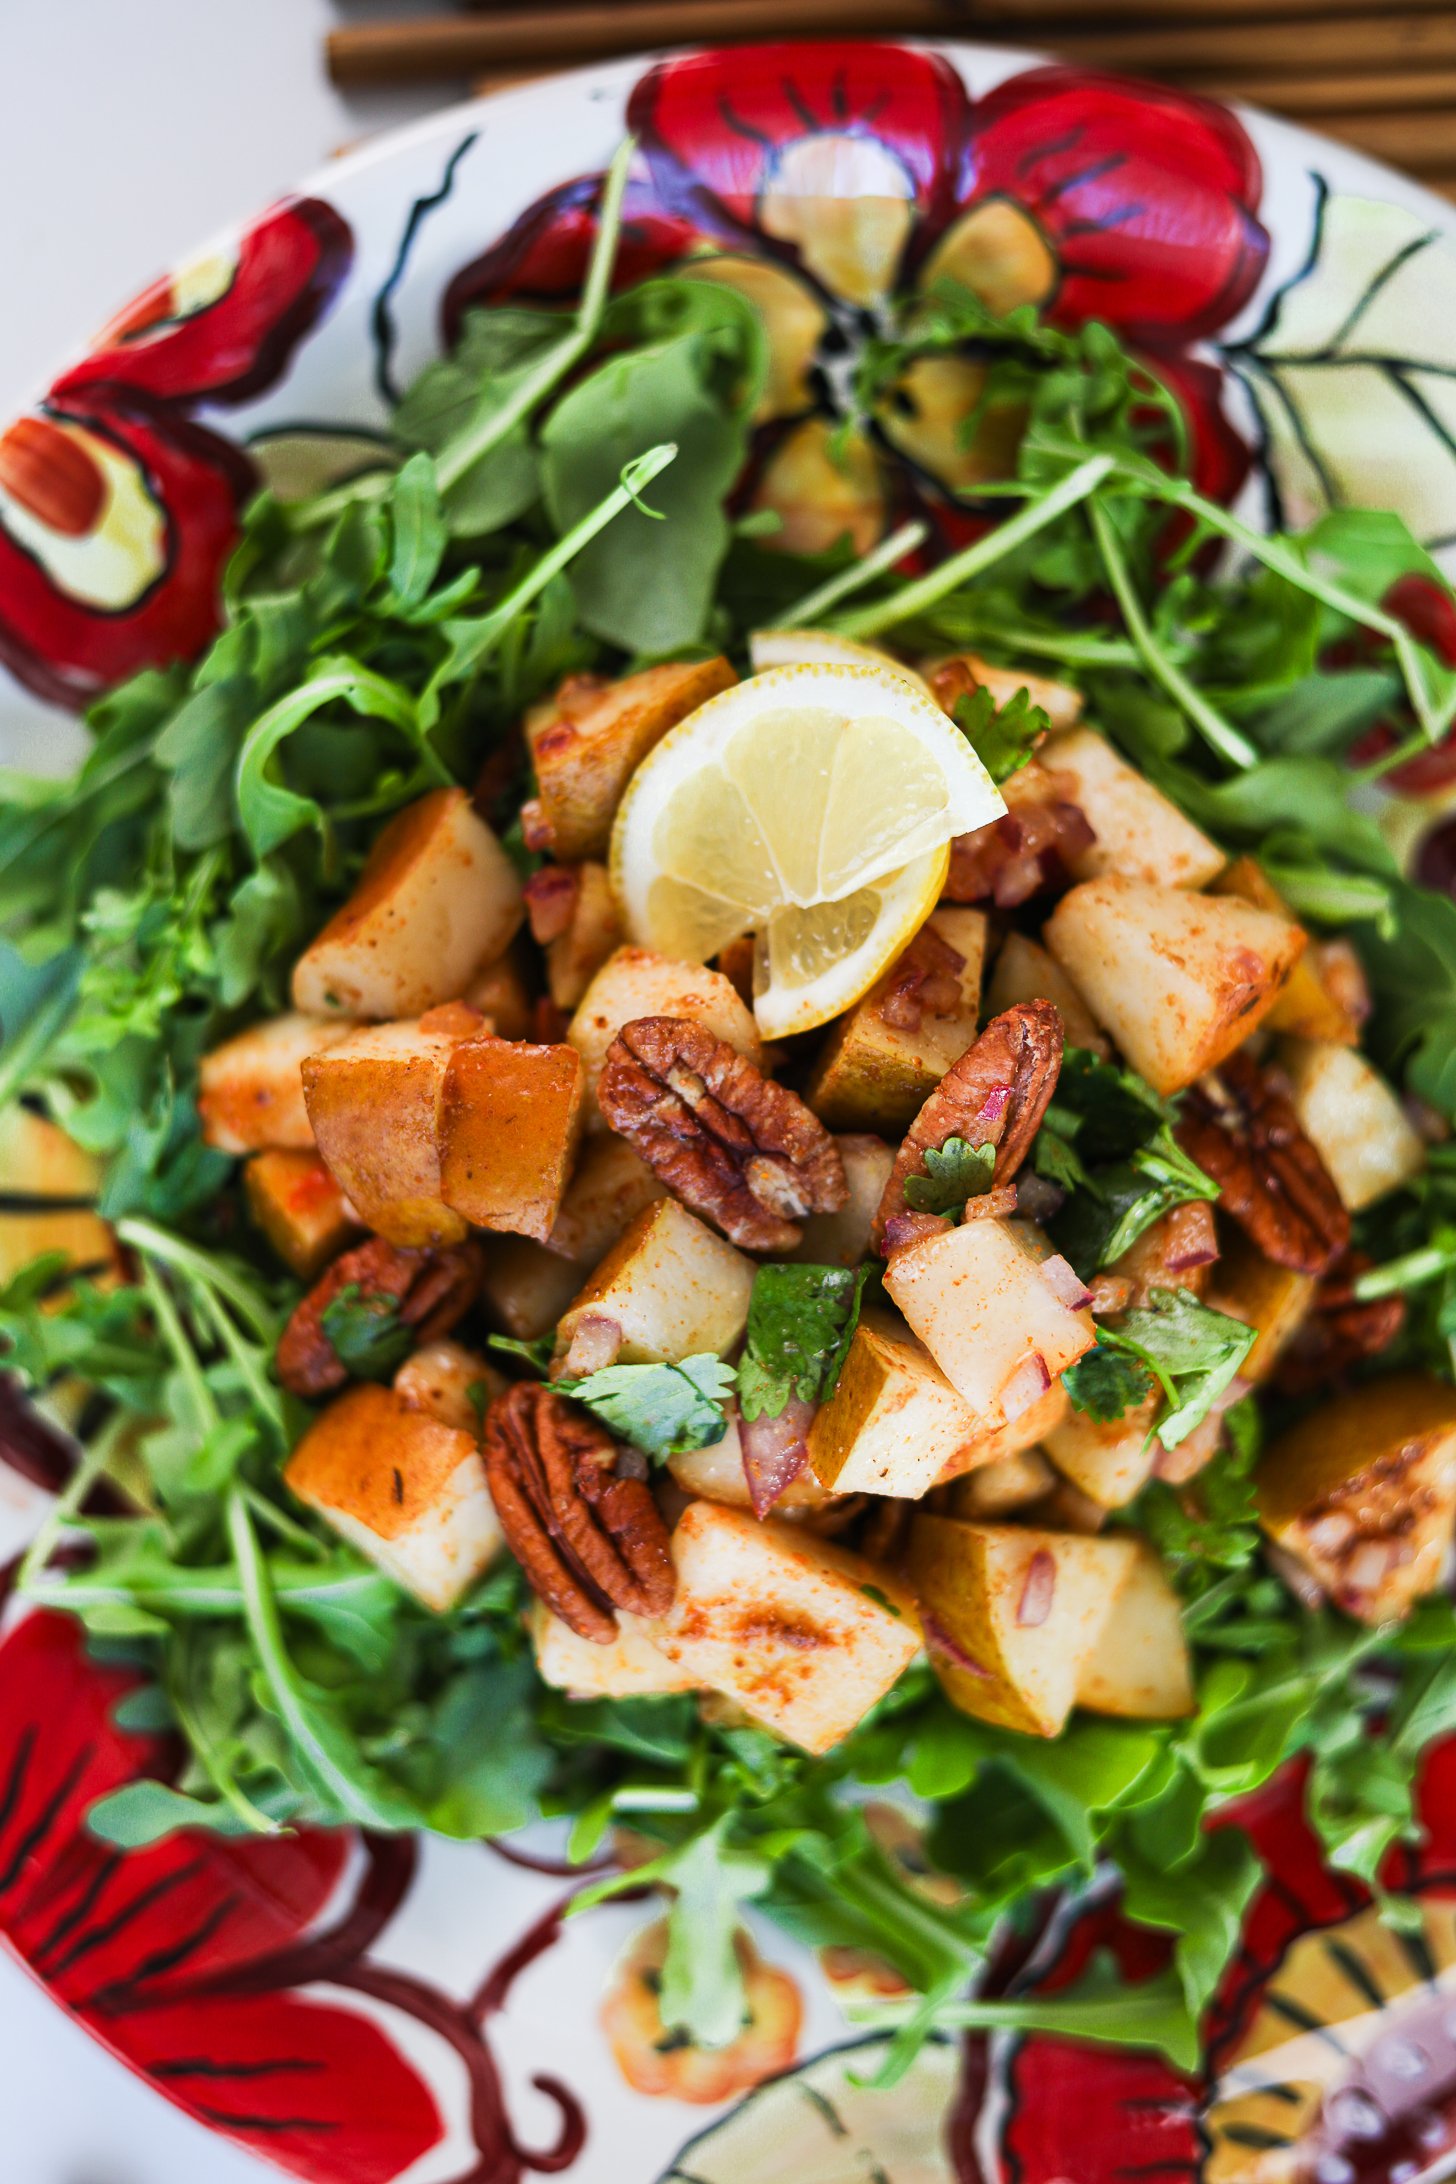 Top down view of Pecan and pear salad arranged atop a bed of rocket (arugula), garnished with cilantro, pecans and lemon slices, served on a floral-printed plate.